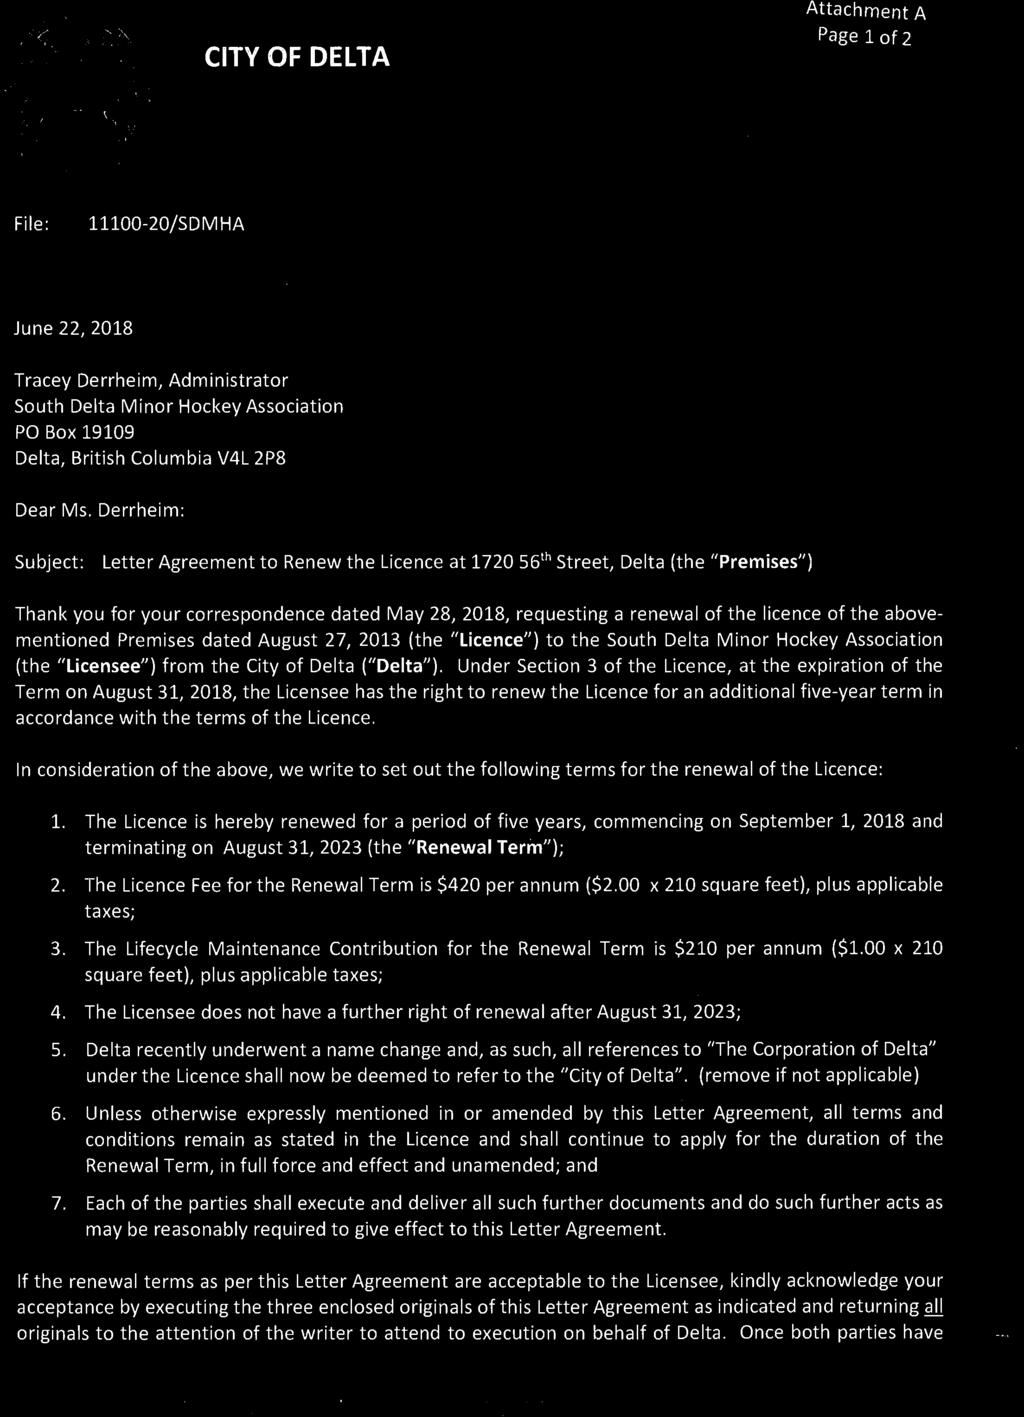 abovementioned Premises dated August 27, 2013 (the "Licence") to the South Delta Minor Hockey Association (the "Licensee") from the City of Delta ("Delta").